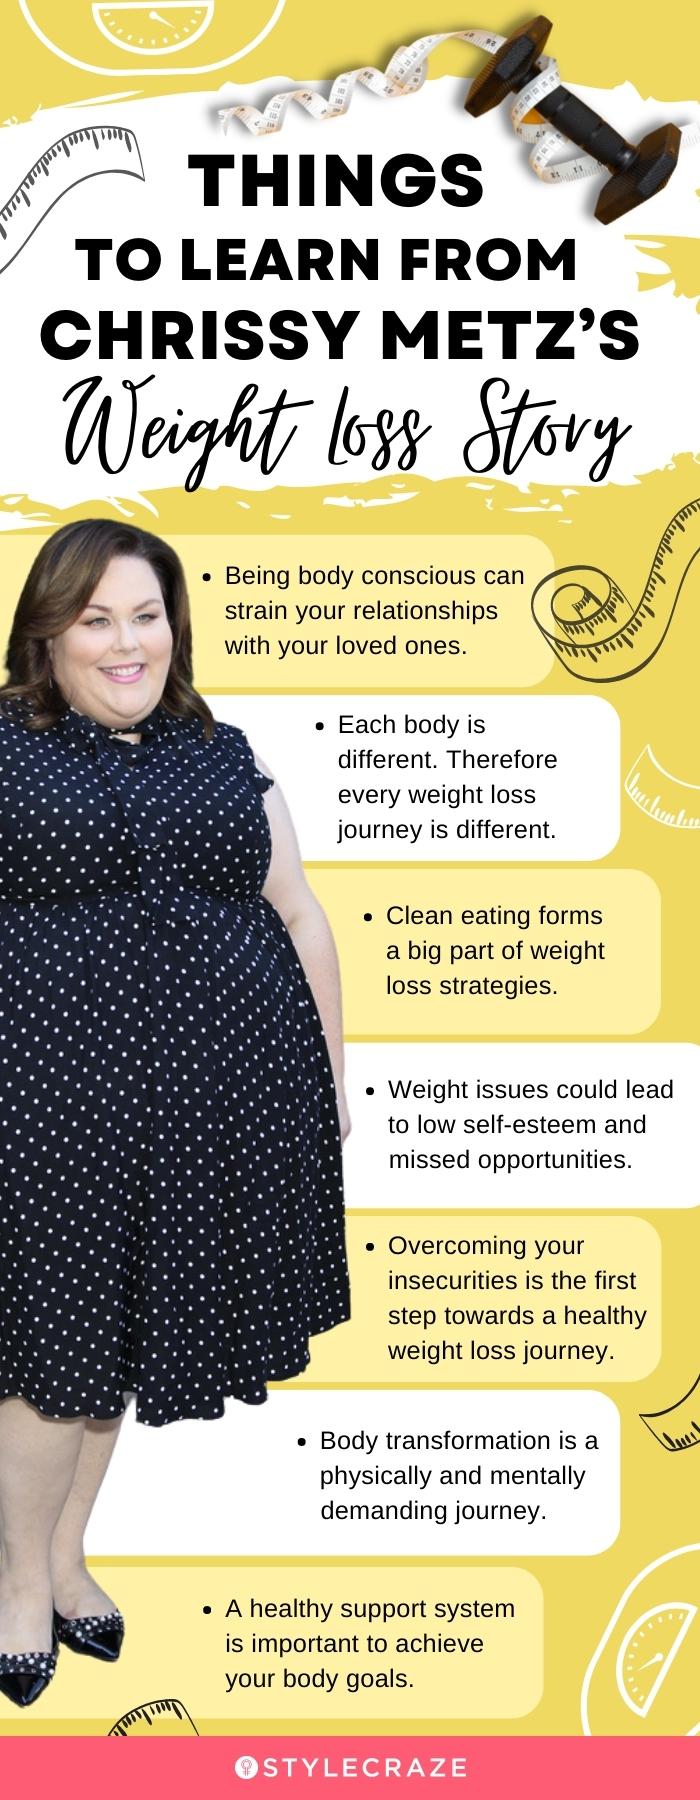 things to learn from chrissy metz’s weight loss (infographic)